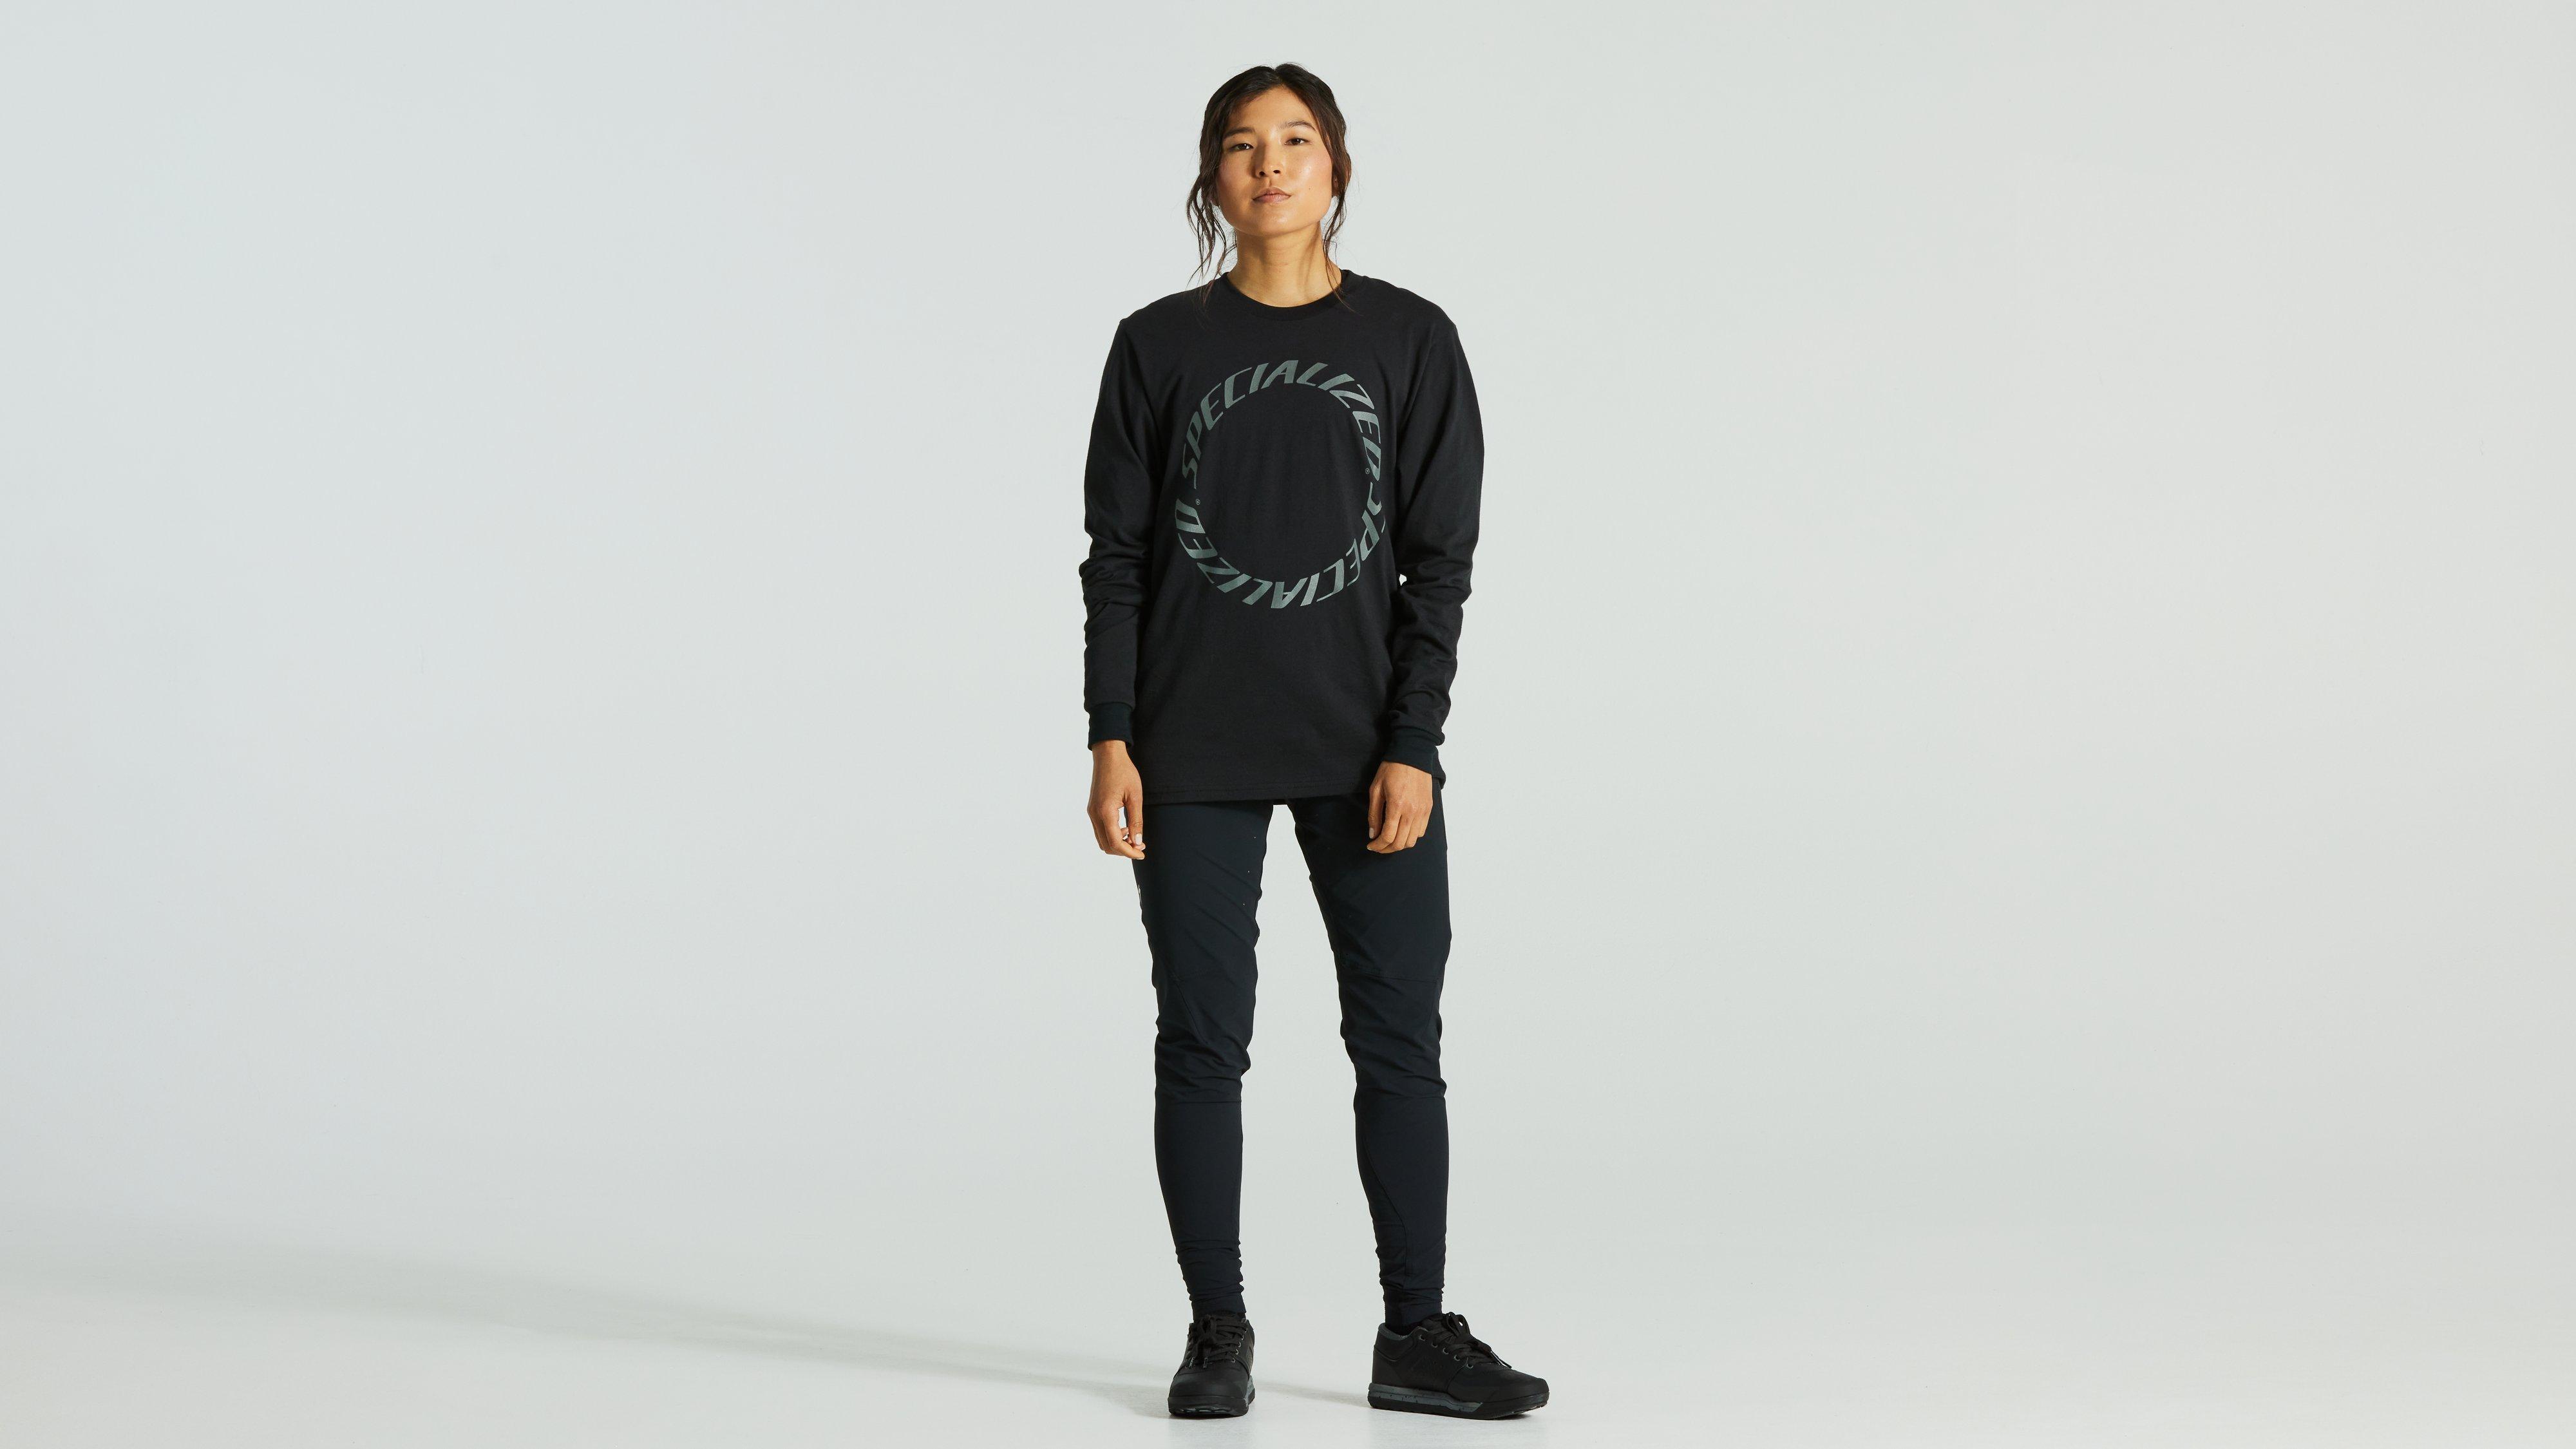 Authentic Longsleeve Tee: Discover Comfort and Style! – Twisted Swag, Inc.